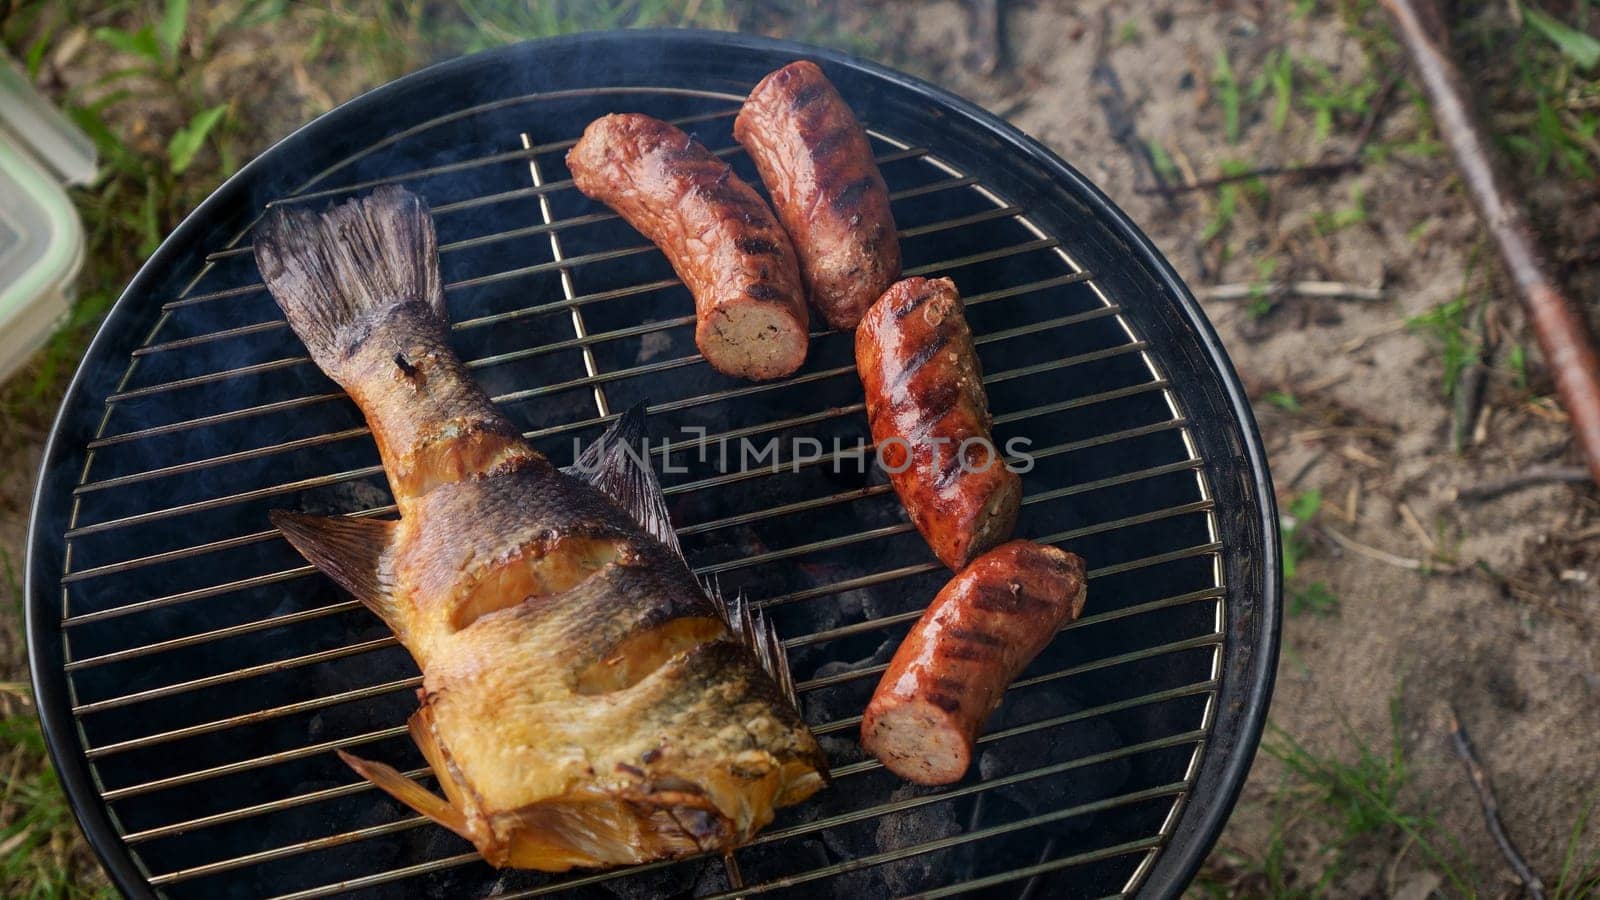 Top view of fresh grilled whole fish, skewer, sausages on round black charcoal grill, green grass background. Barbecue, grill and food concept. Camping with family